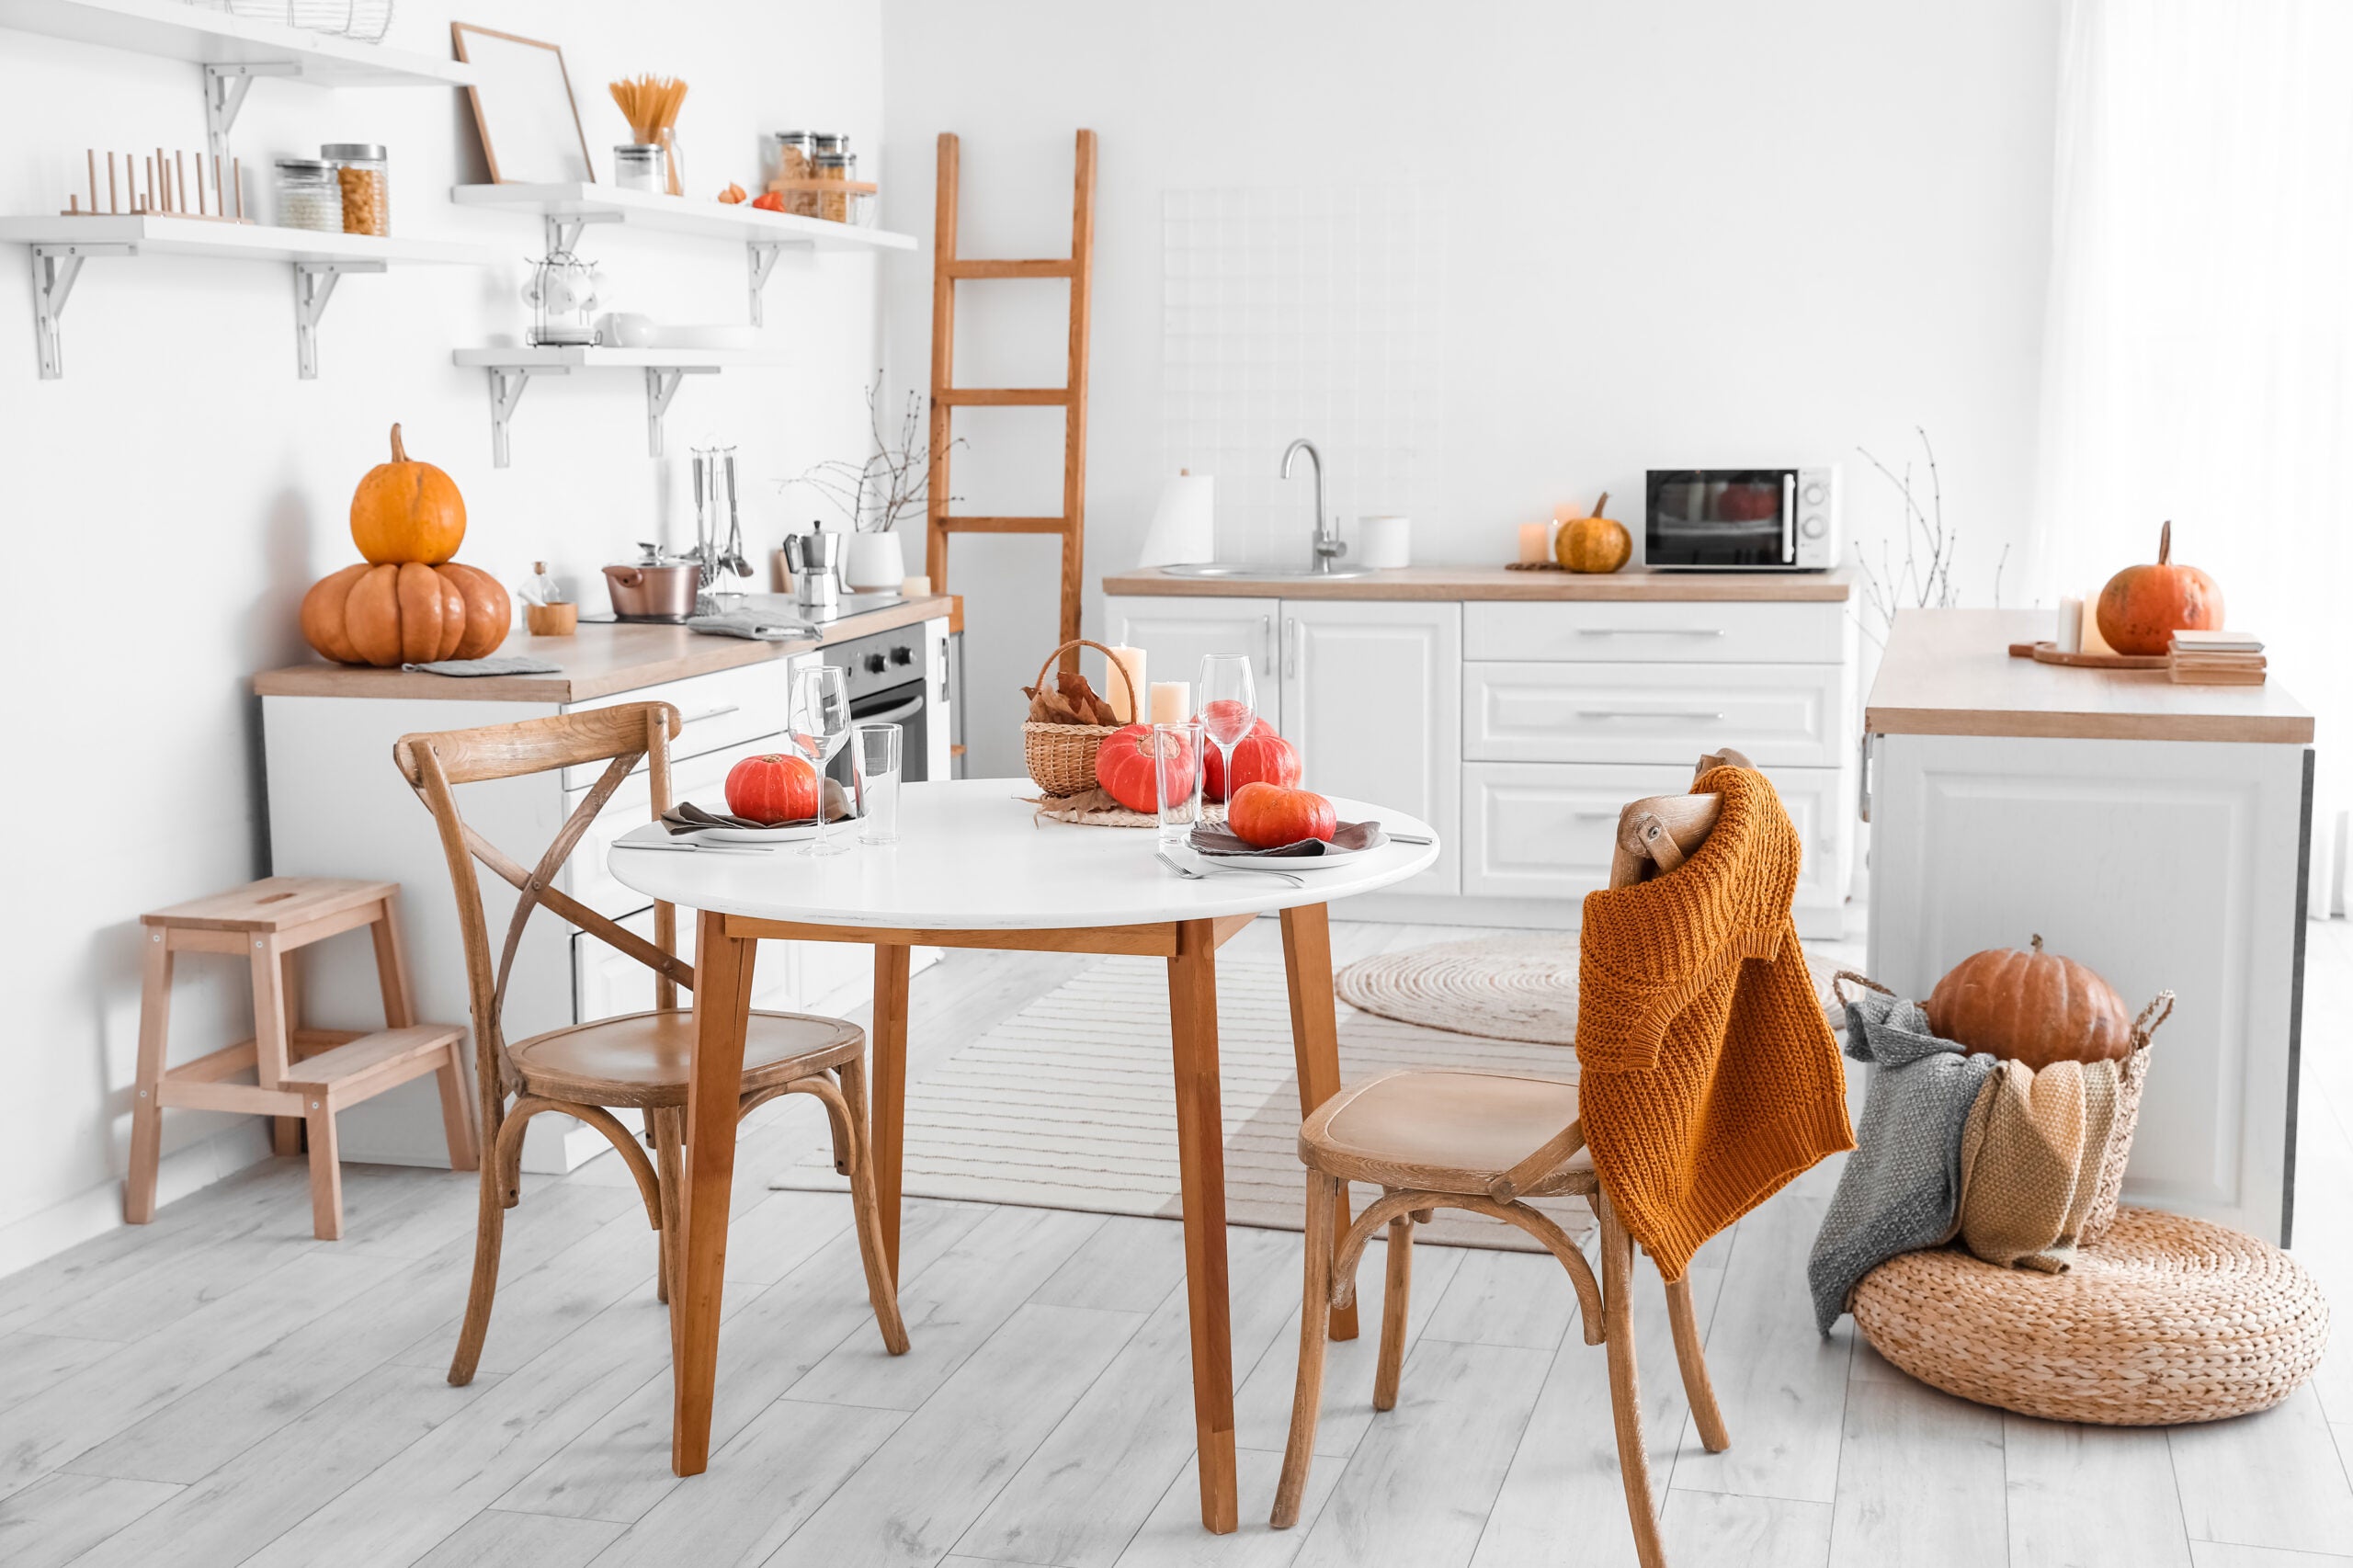 Interior of light kitchen with counters, dining table and pumpkins